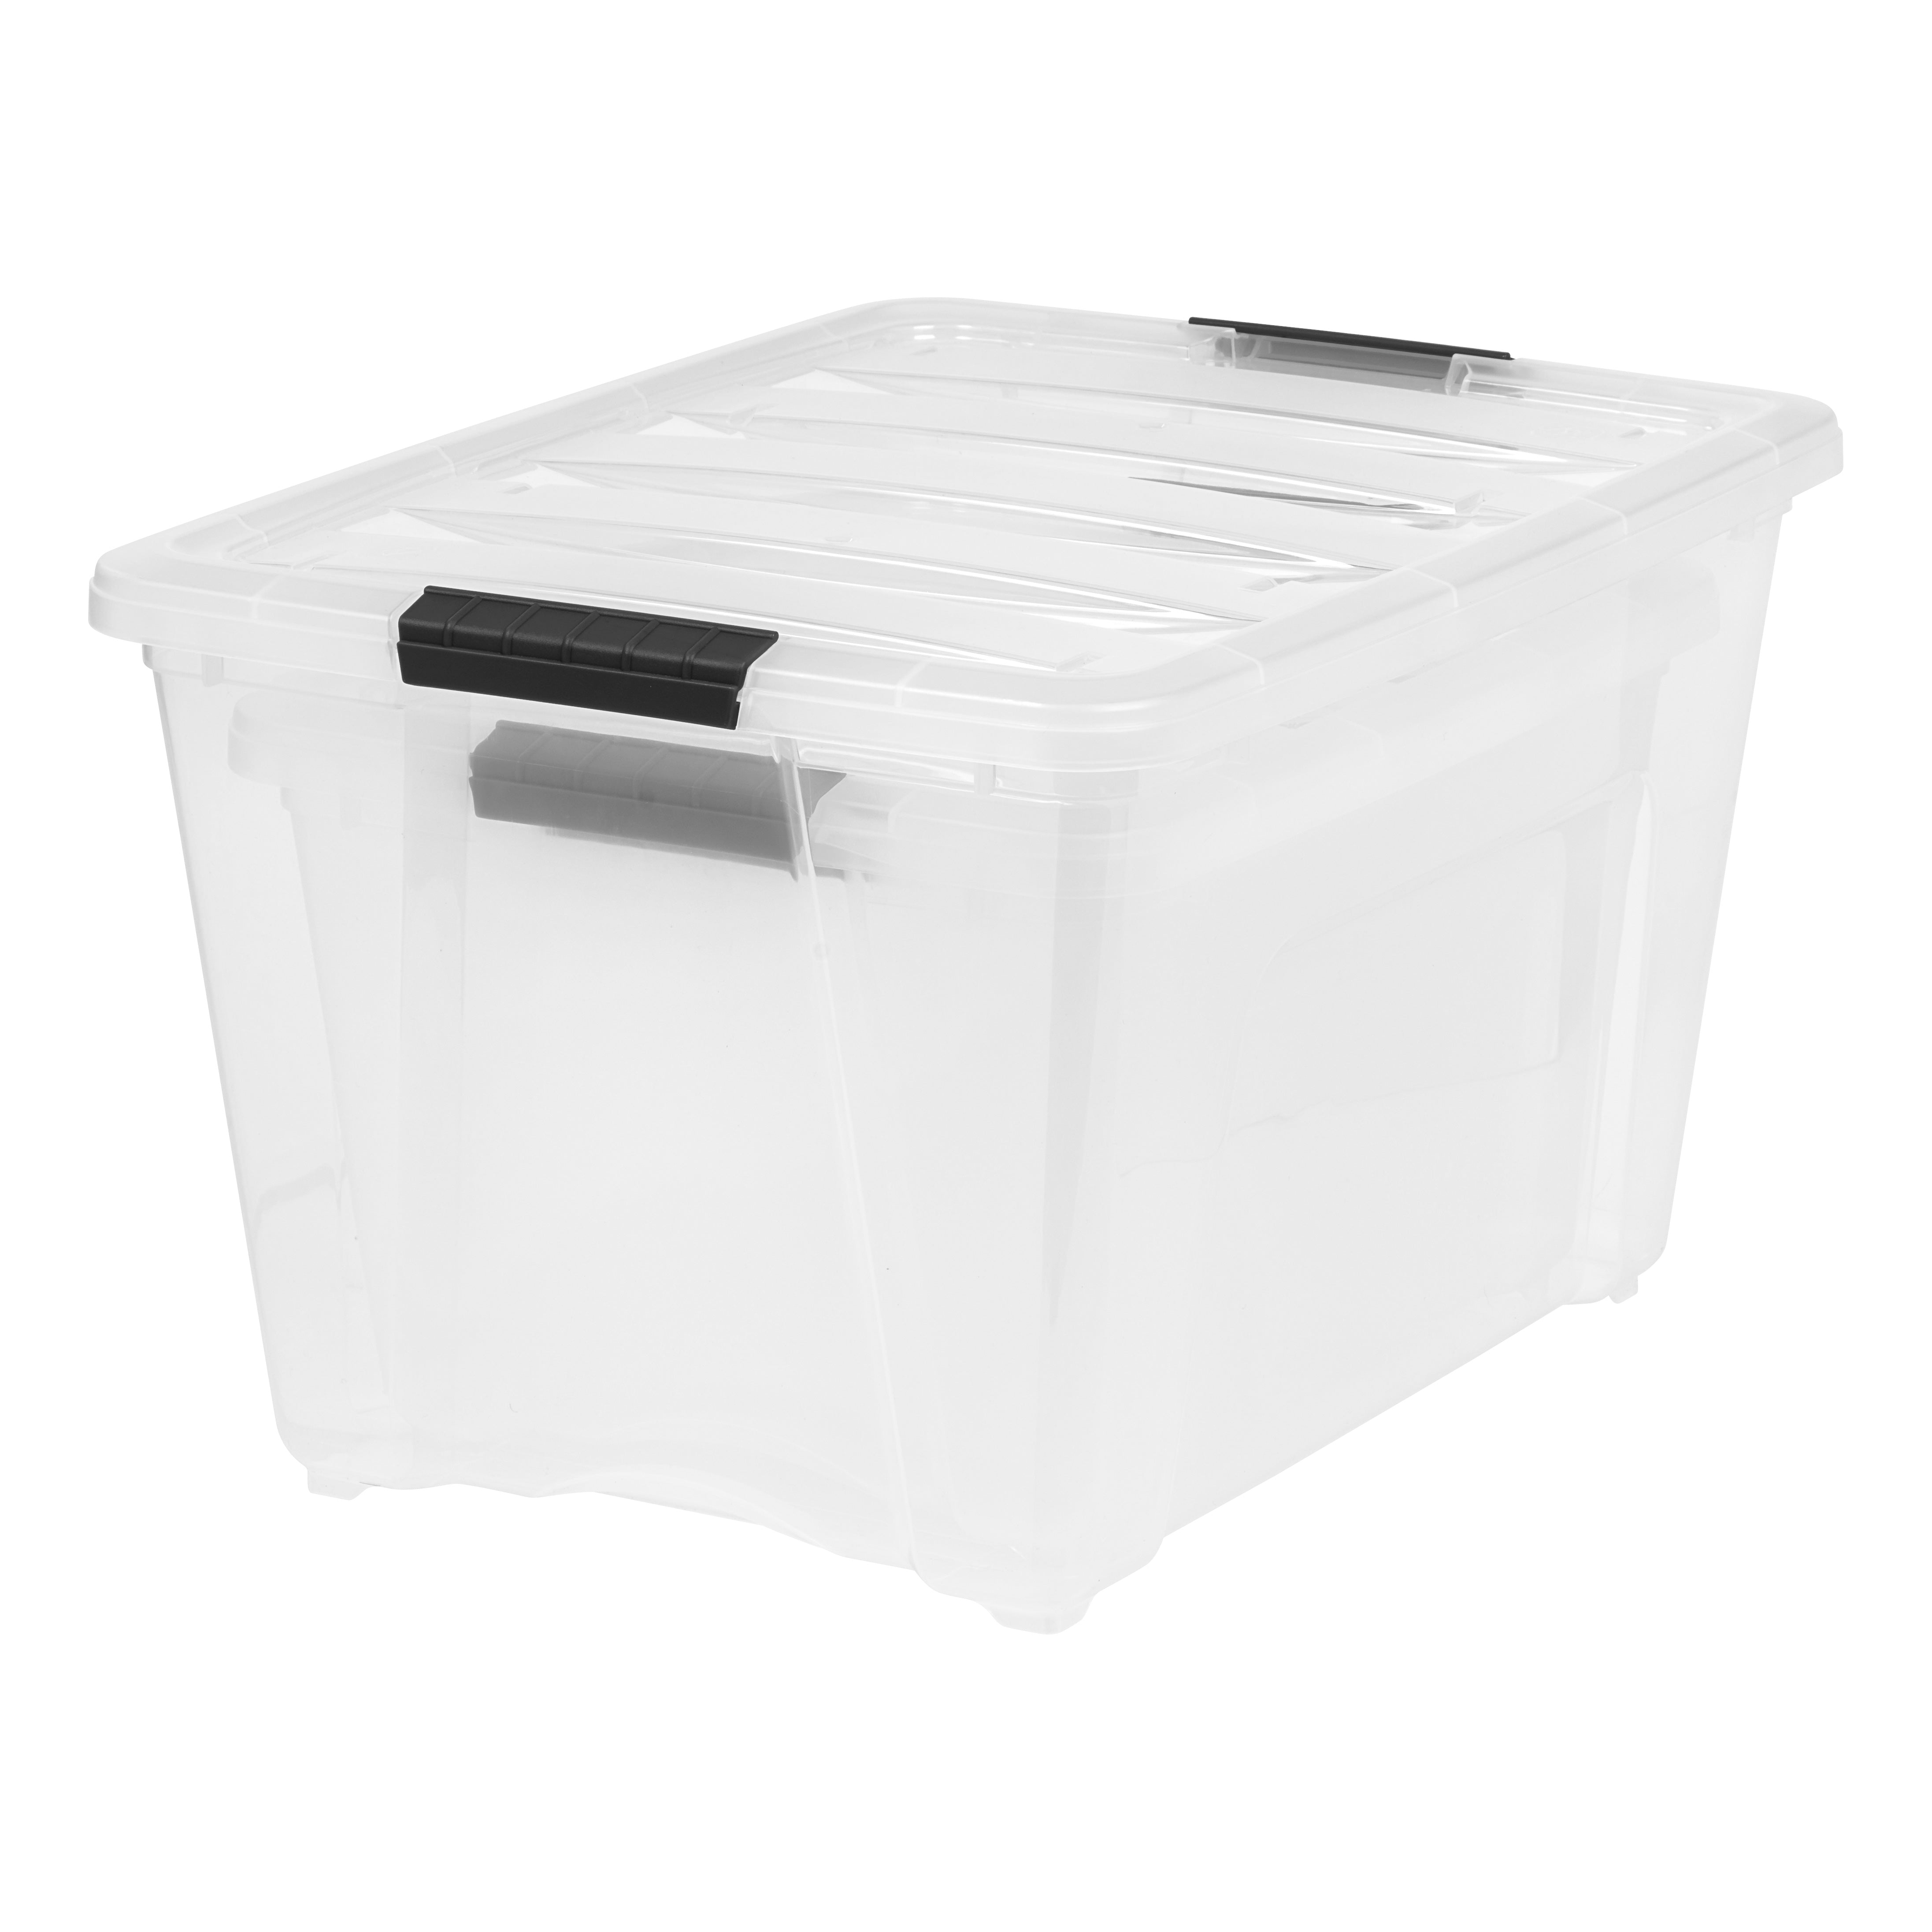  IRIS USA 19 Quart Stackable Plastic Storage Bins with Lids and  Latching Buckles, 4 Pack - Clear/Black, Containers with Lids and Latches,  Durable Nestable Closet, Garage, Totes, Tubs Boxes Organizing 